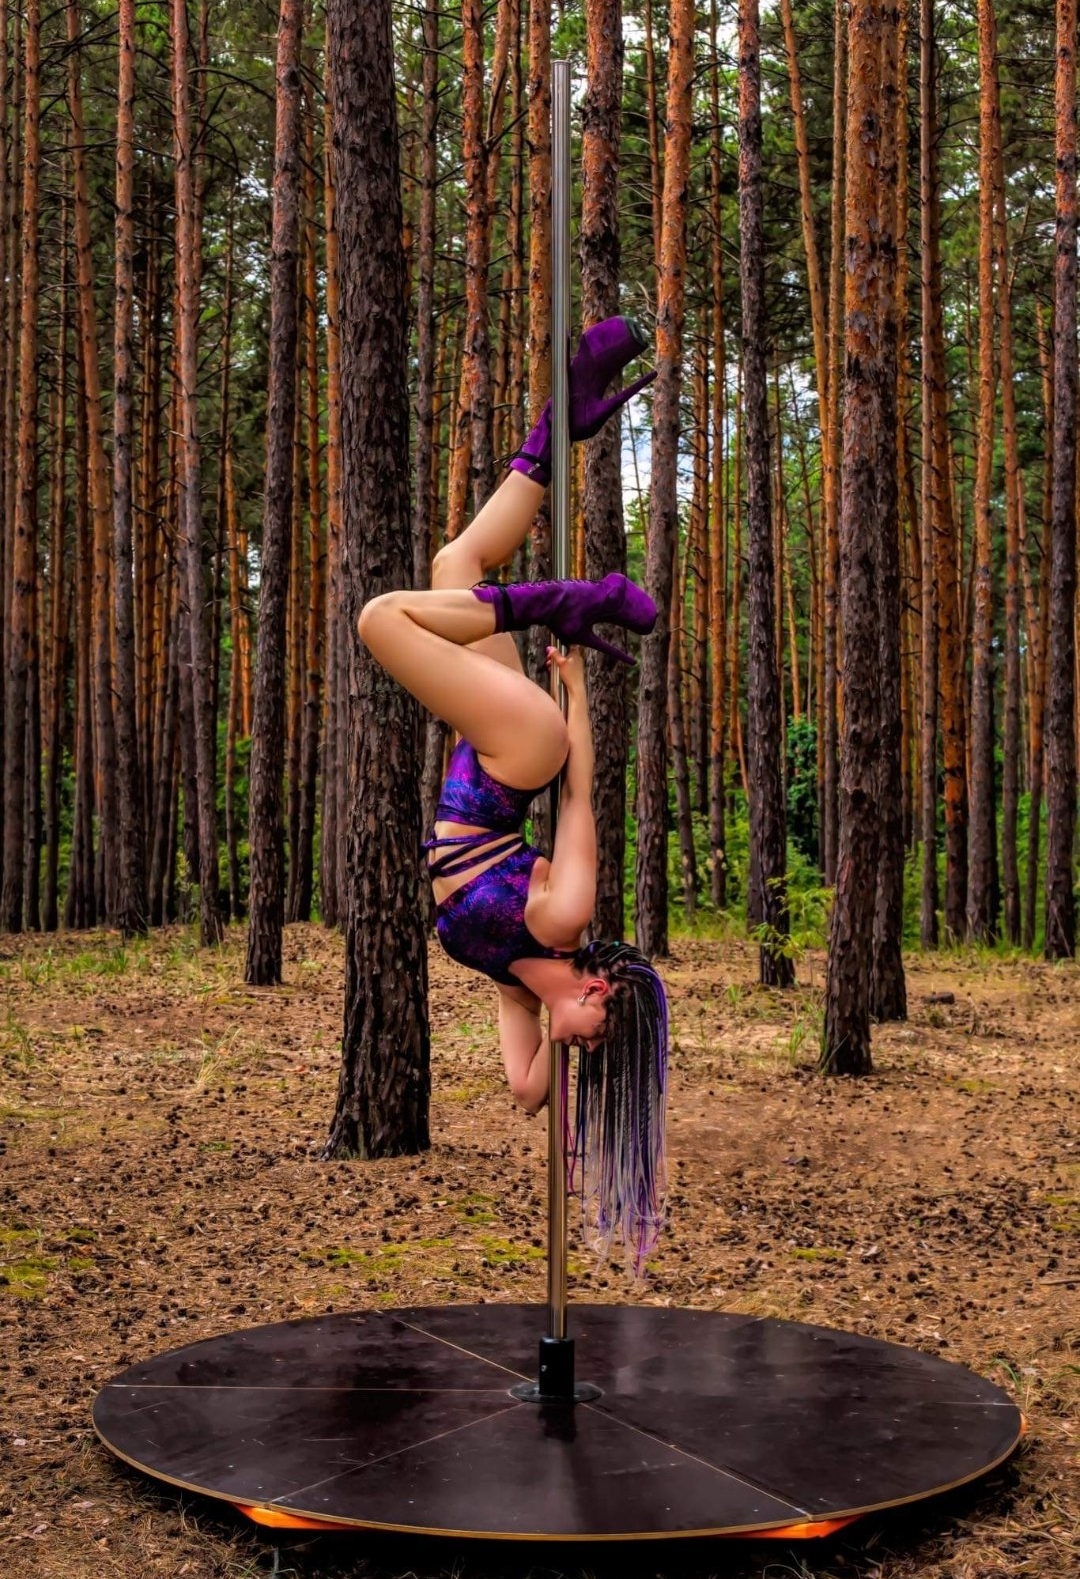 Spinning Pole Dance Workshop in Cardiff